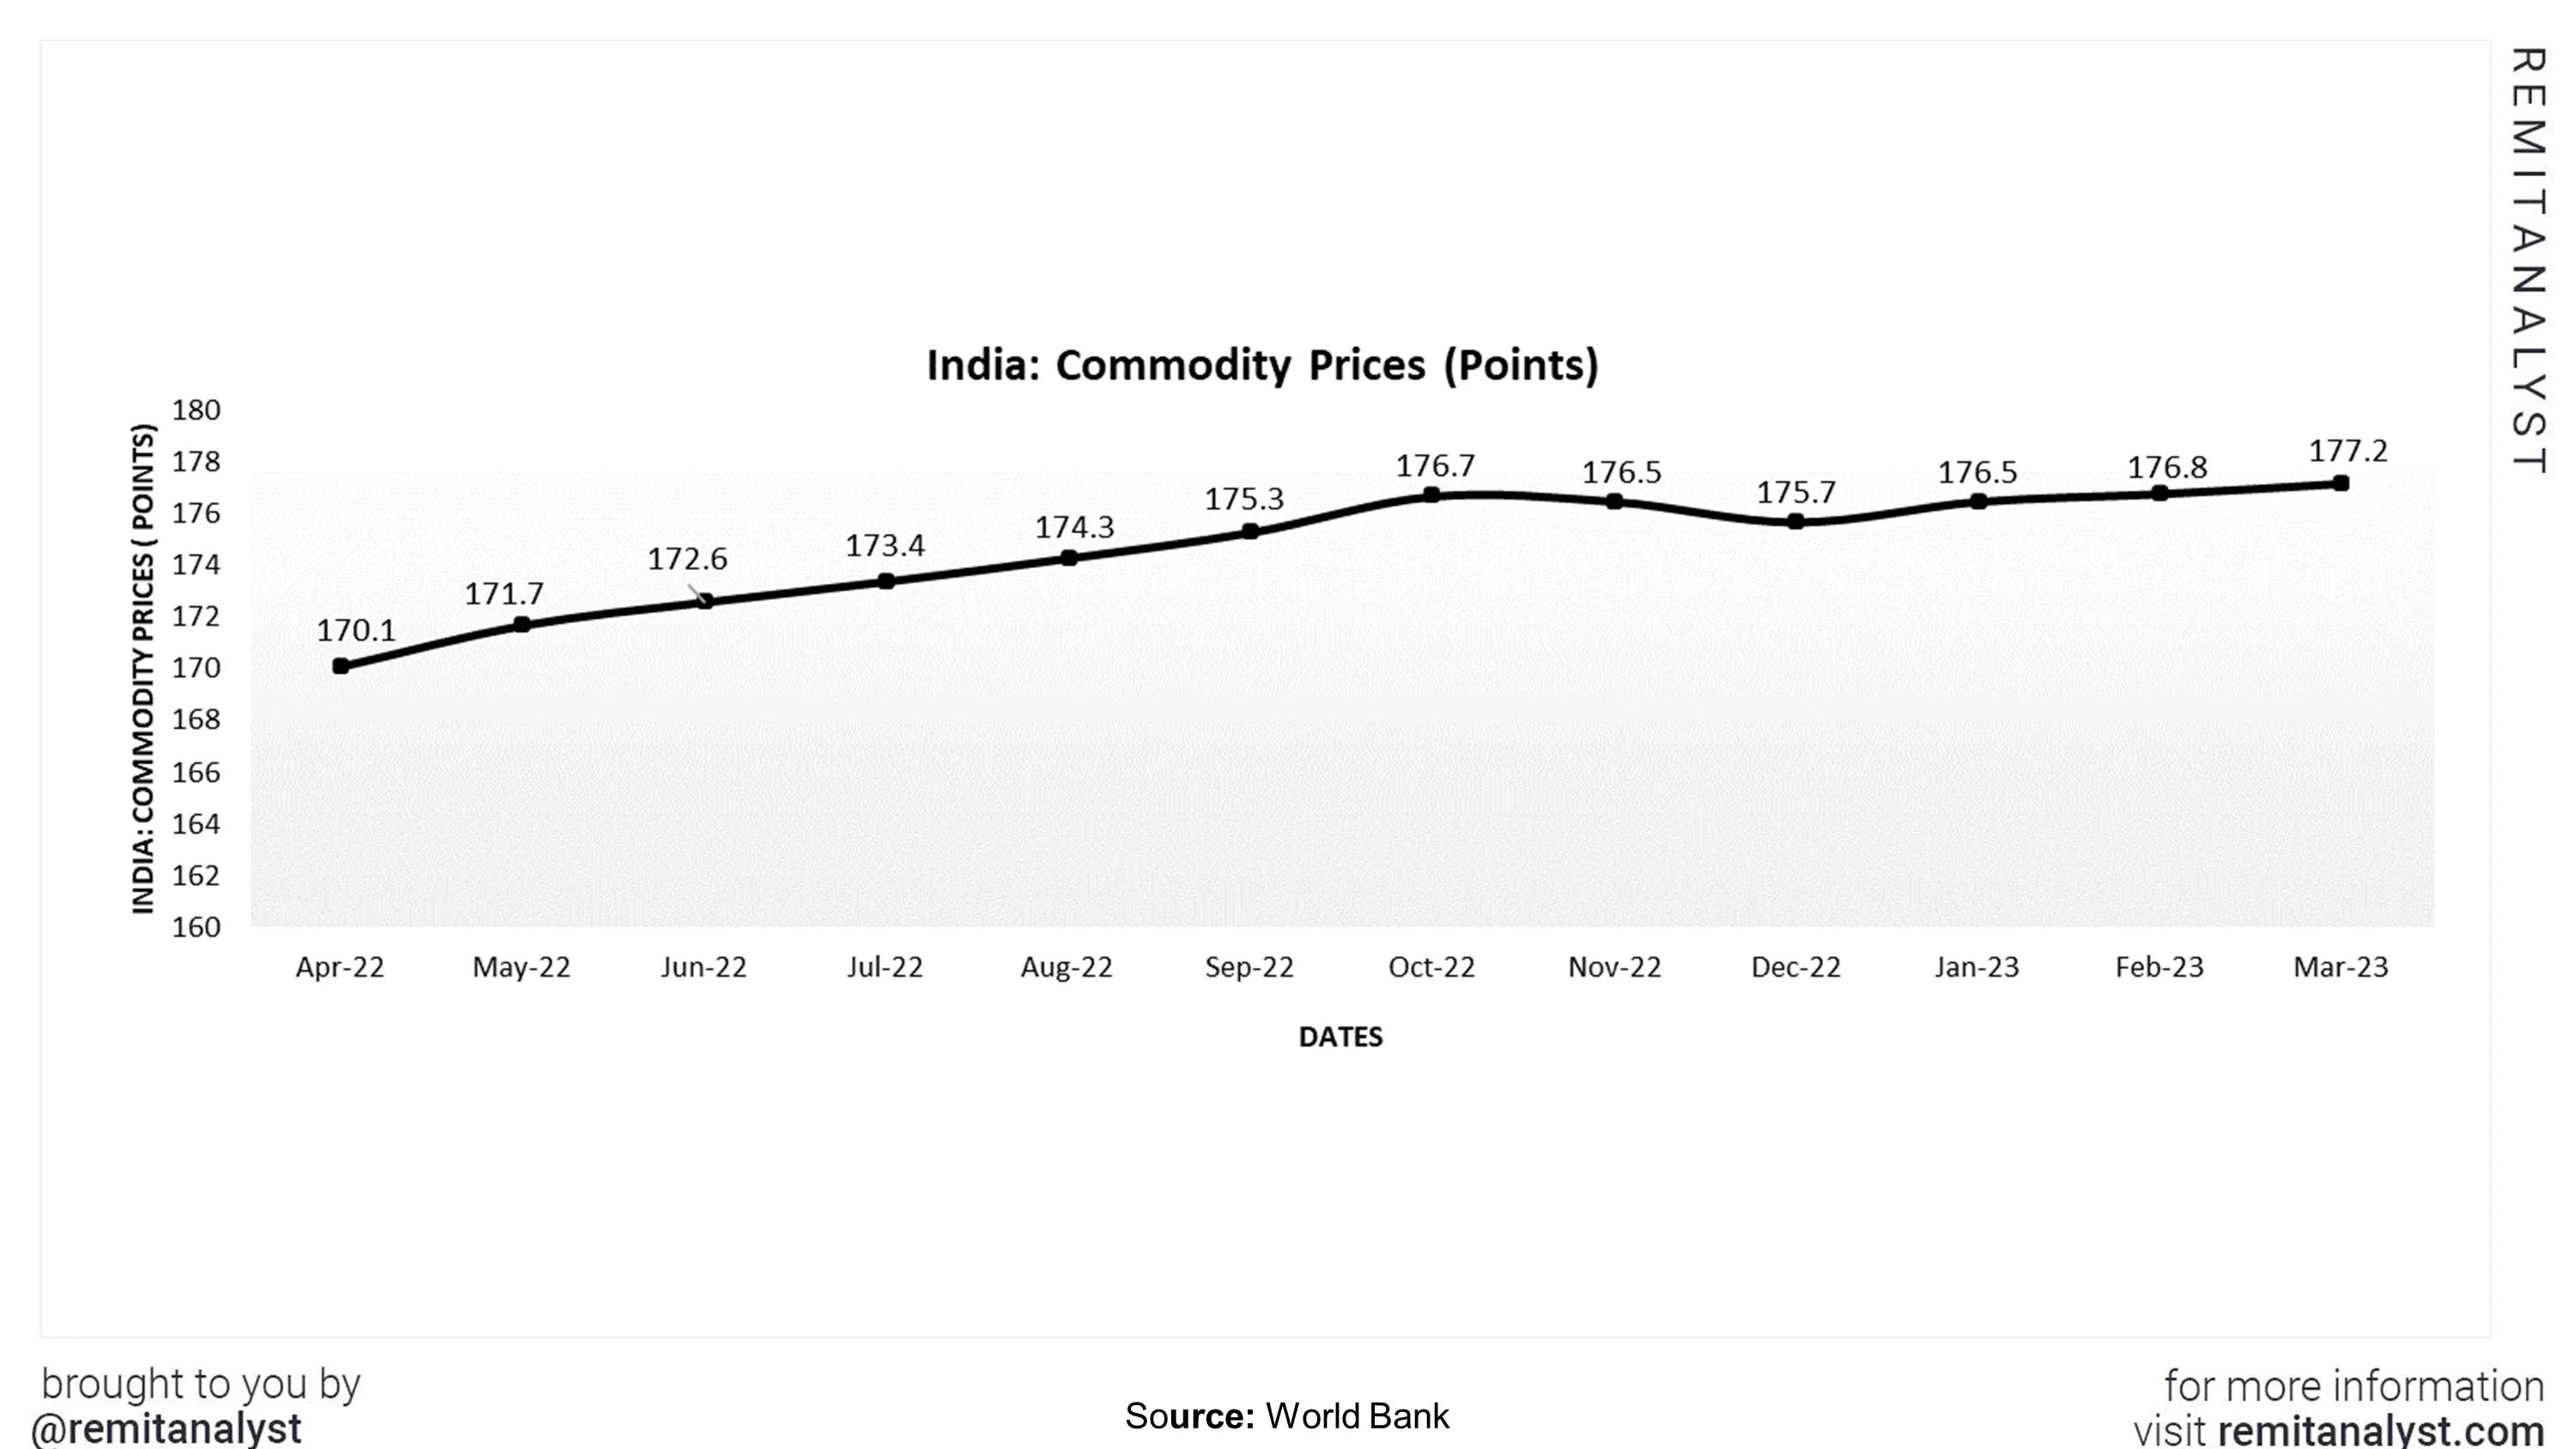 commodity -prices-india-from-apr-2022-to-mar-2023